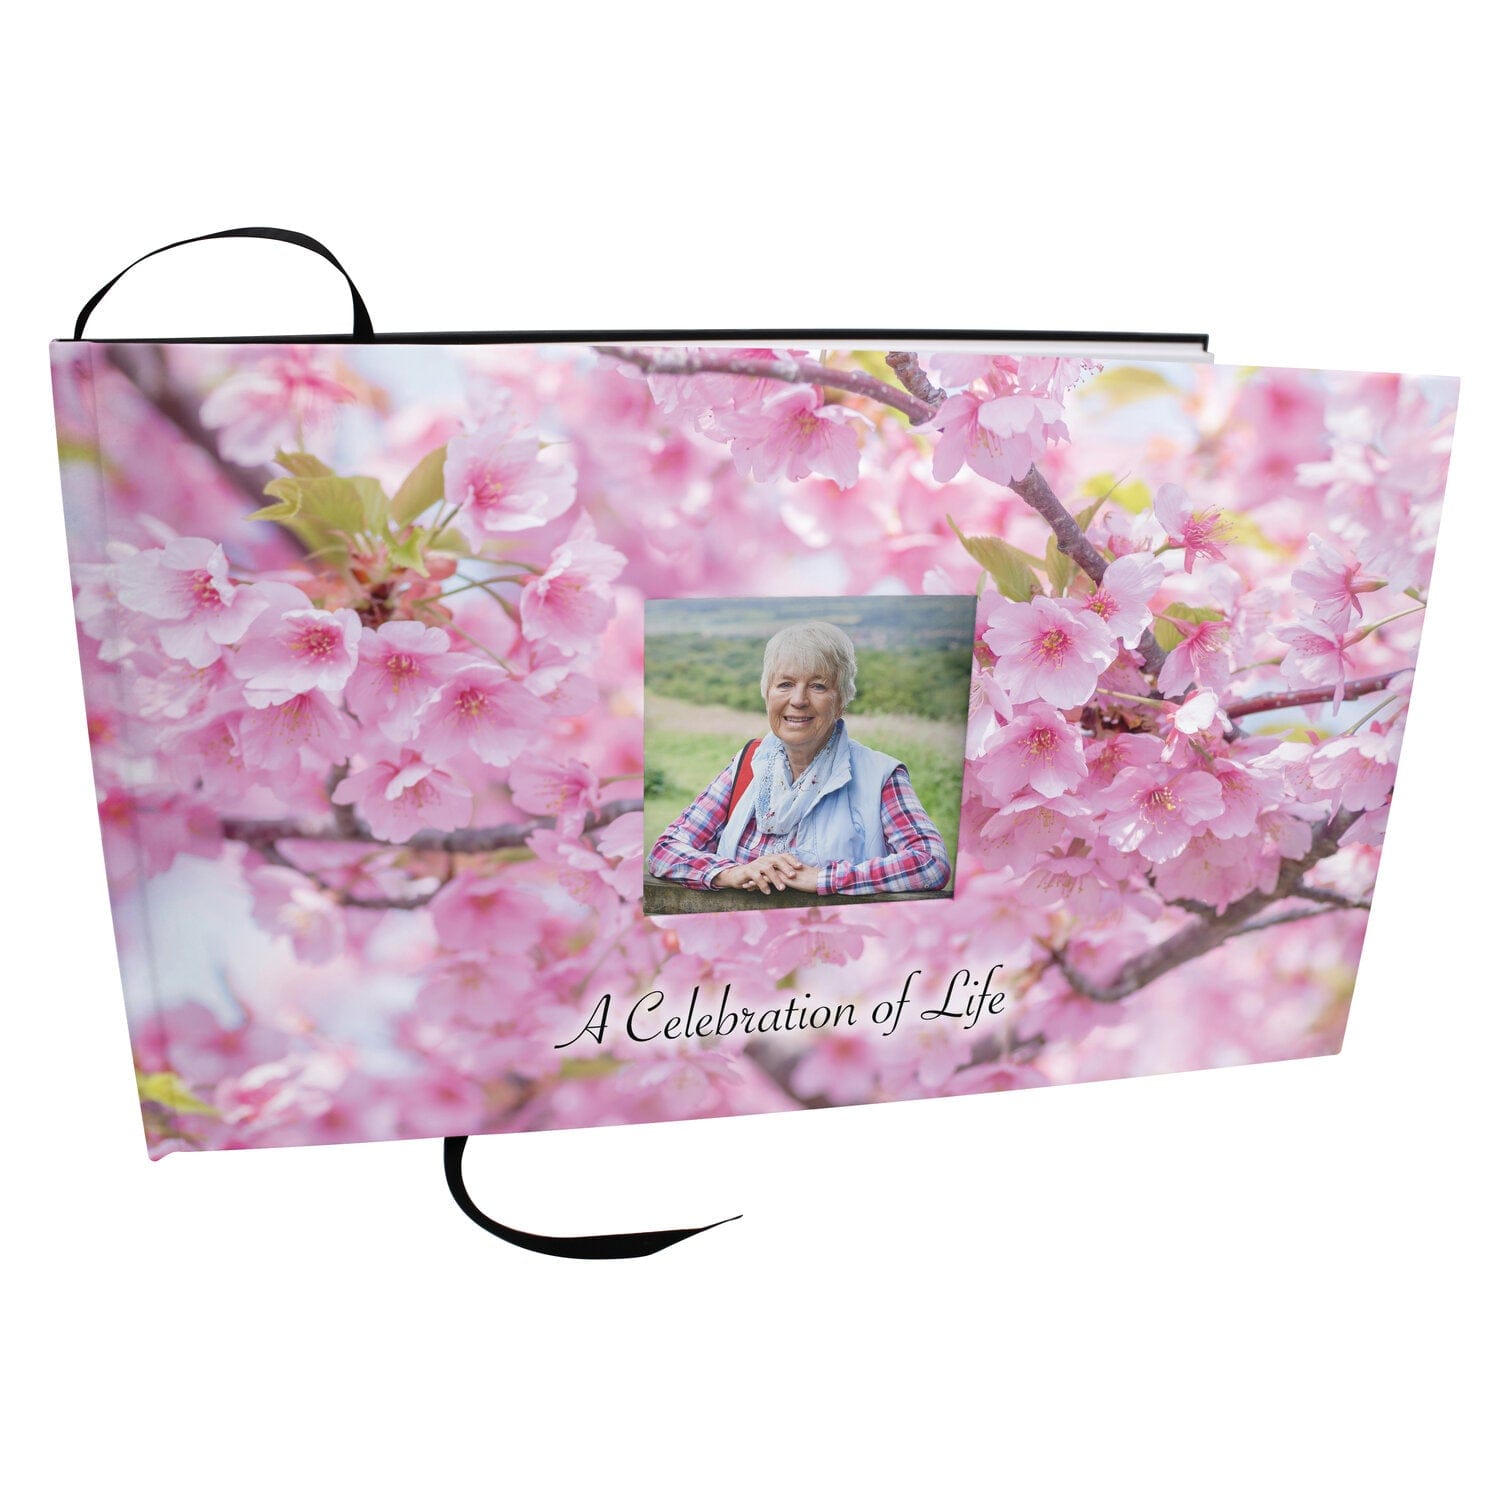 Commemorative Cremation Urns Cherry Blossom Matching Themed 'Celebration of Life' Guest Book for Funeral or Memorial Service